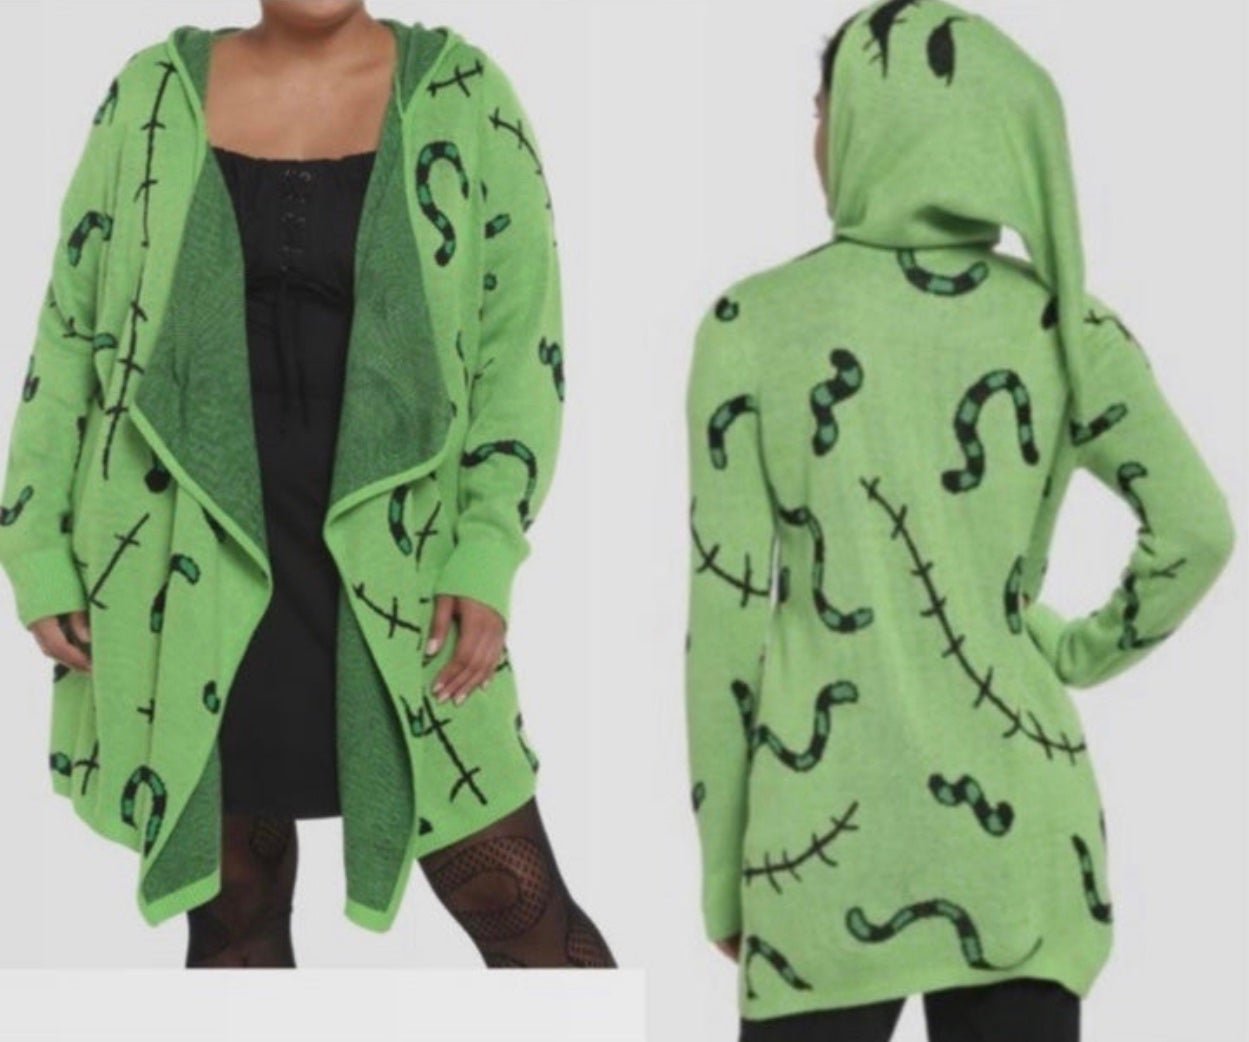 high discount Oogie Boogie Hot Topic Nightmare Before Christmas Cardigan Size Medium KZytnOW1l well sale